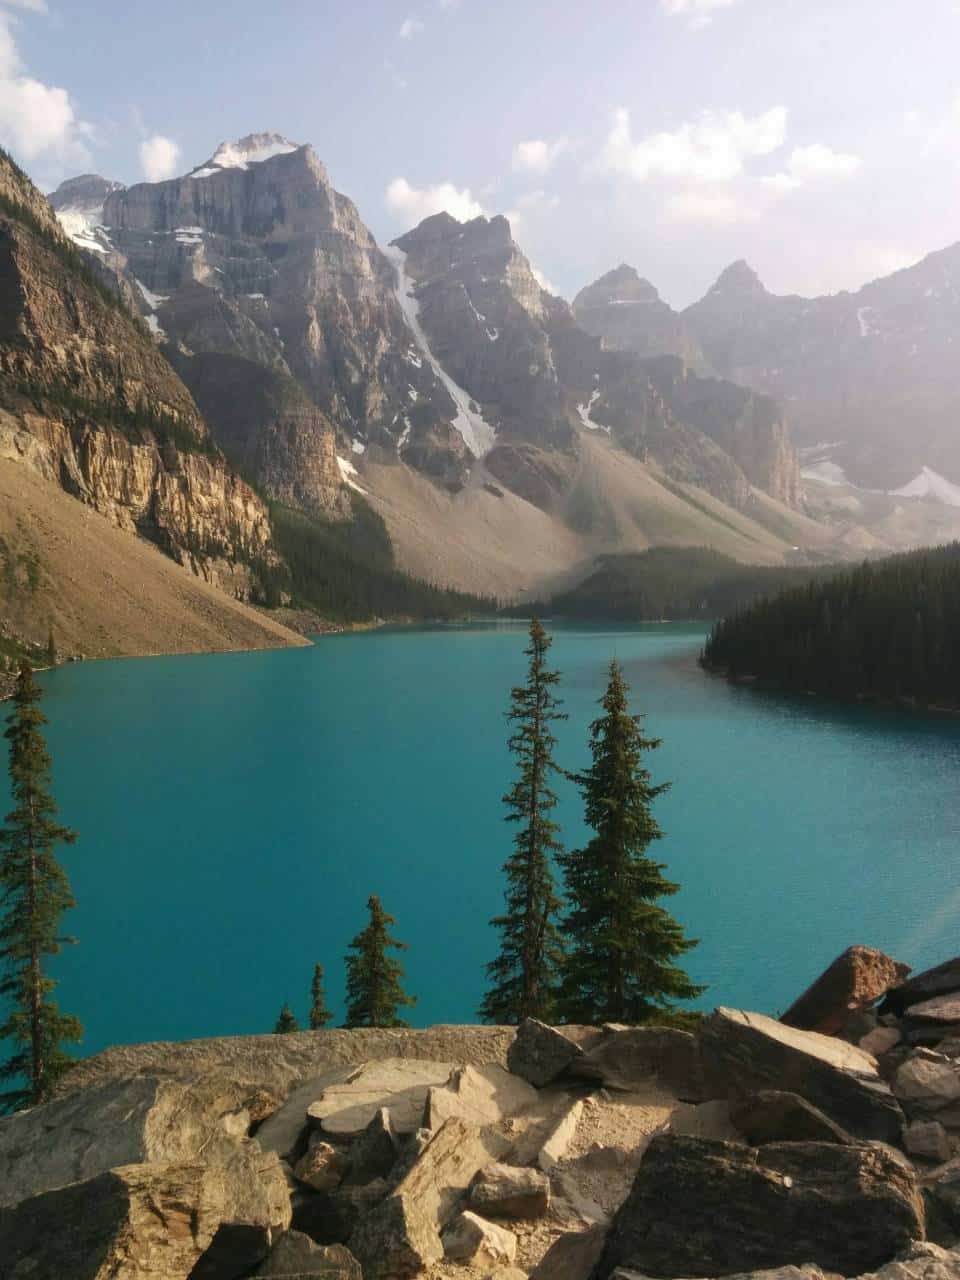 Alberta 2018-08-10 - Moraine Lake, Alberta.
The road to get here is only open from May to October. It's a bit smokey from all the forest fires around.